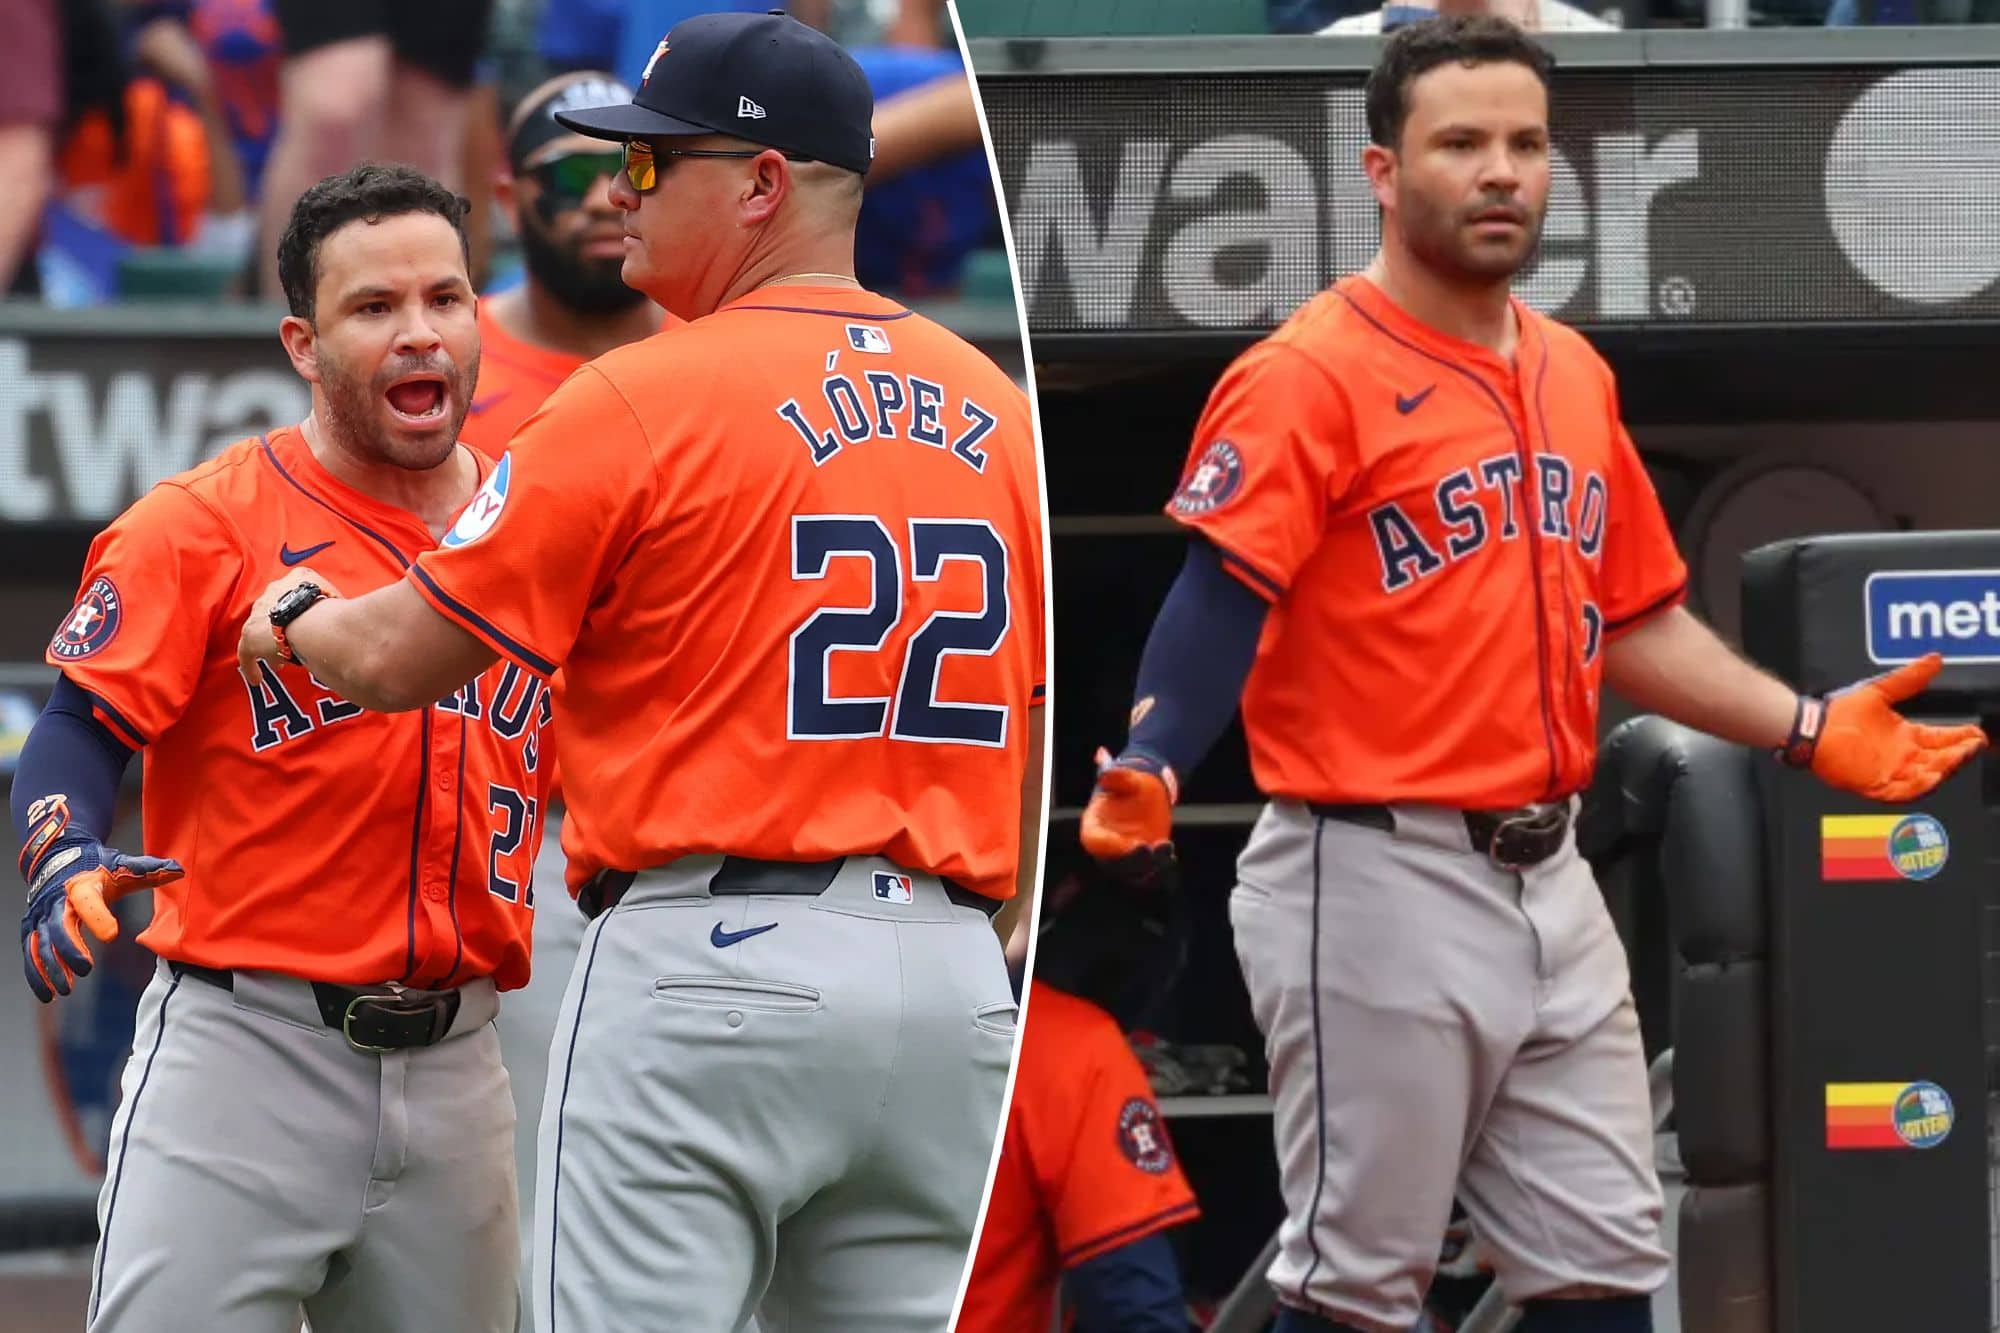 Jose Altuve Ejected After Umpire Missed Call Against Mets